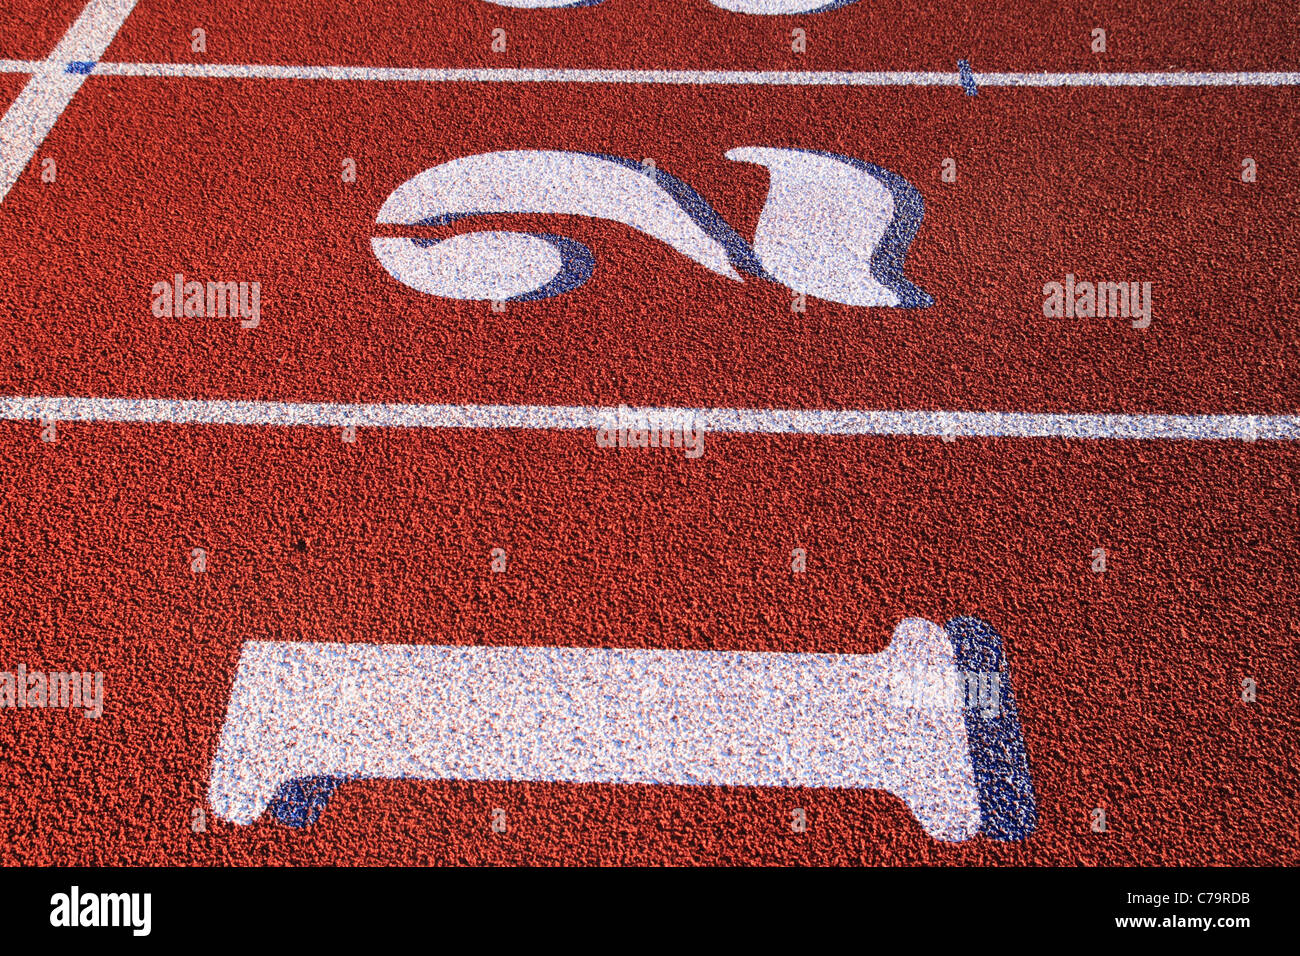 lanes one and two on a red rubber athletic track Stock Photo